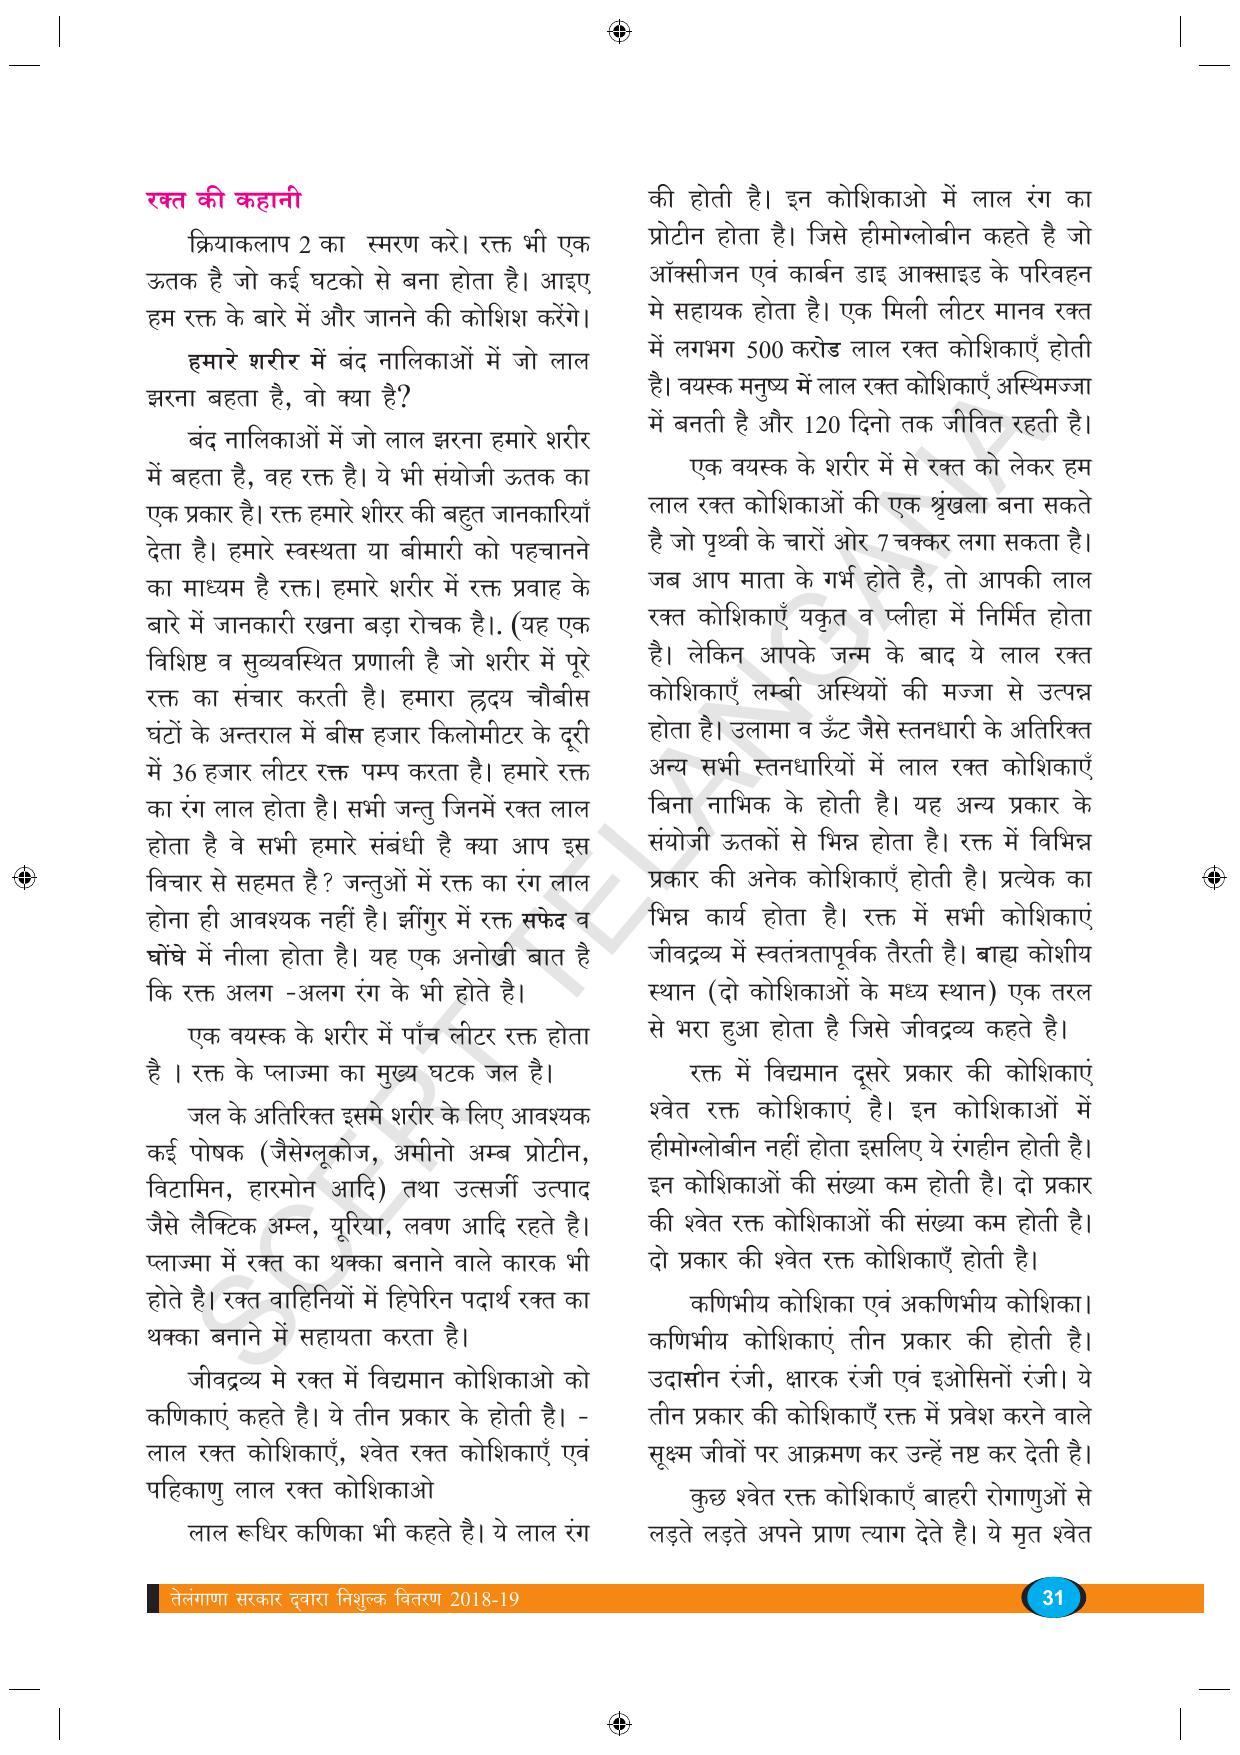 TS SCERT Class 9 Biological Science (Hindi Medium) Text Book - Page 43